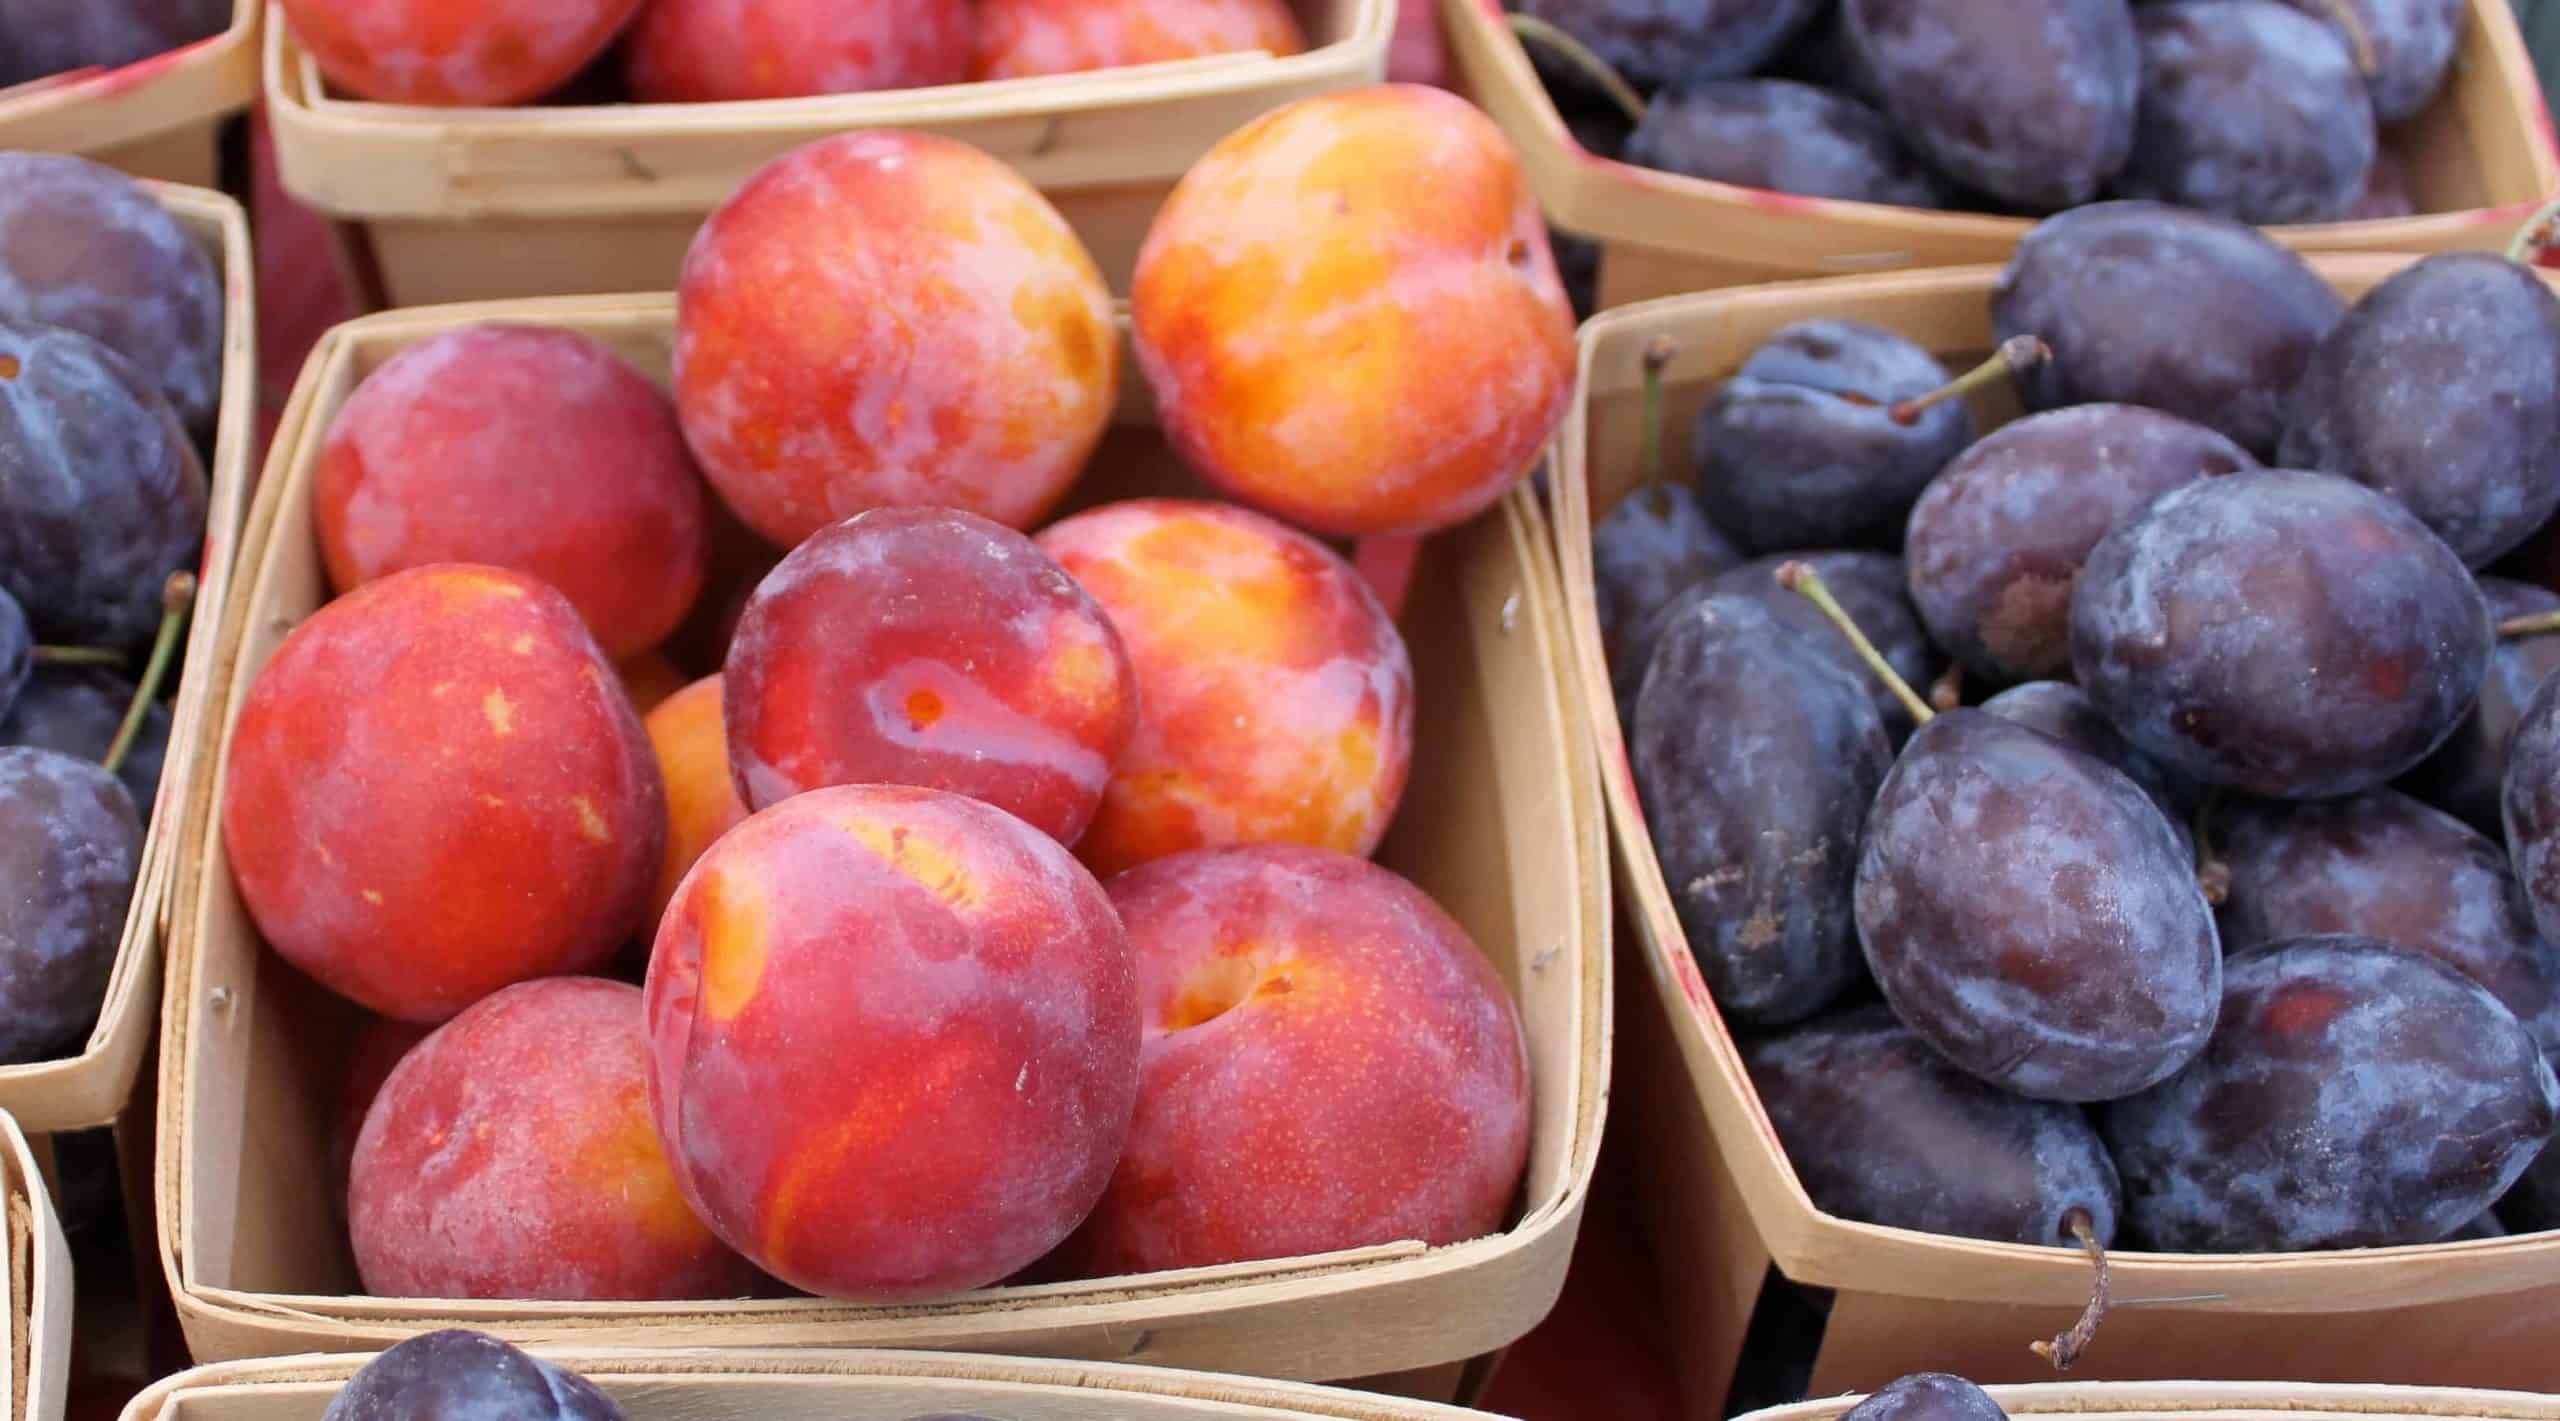 Plums gleam in purple and gold at a farmers market table.